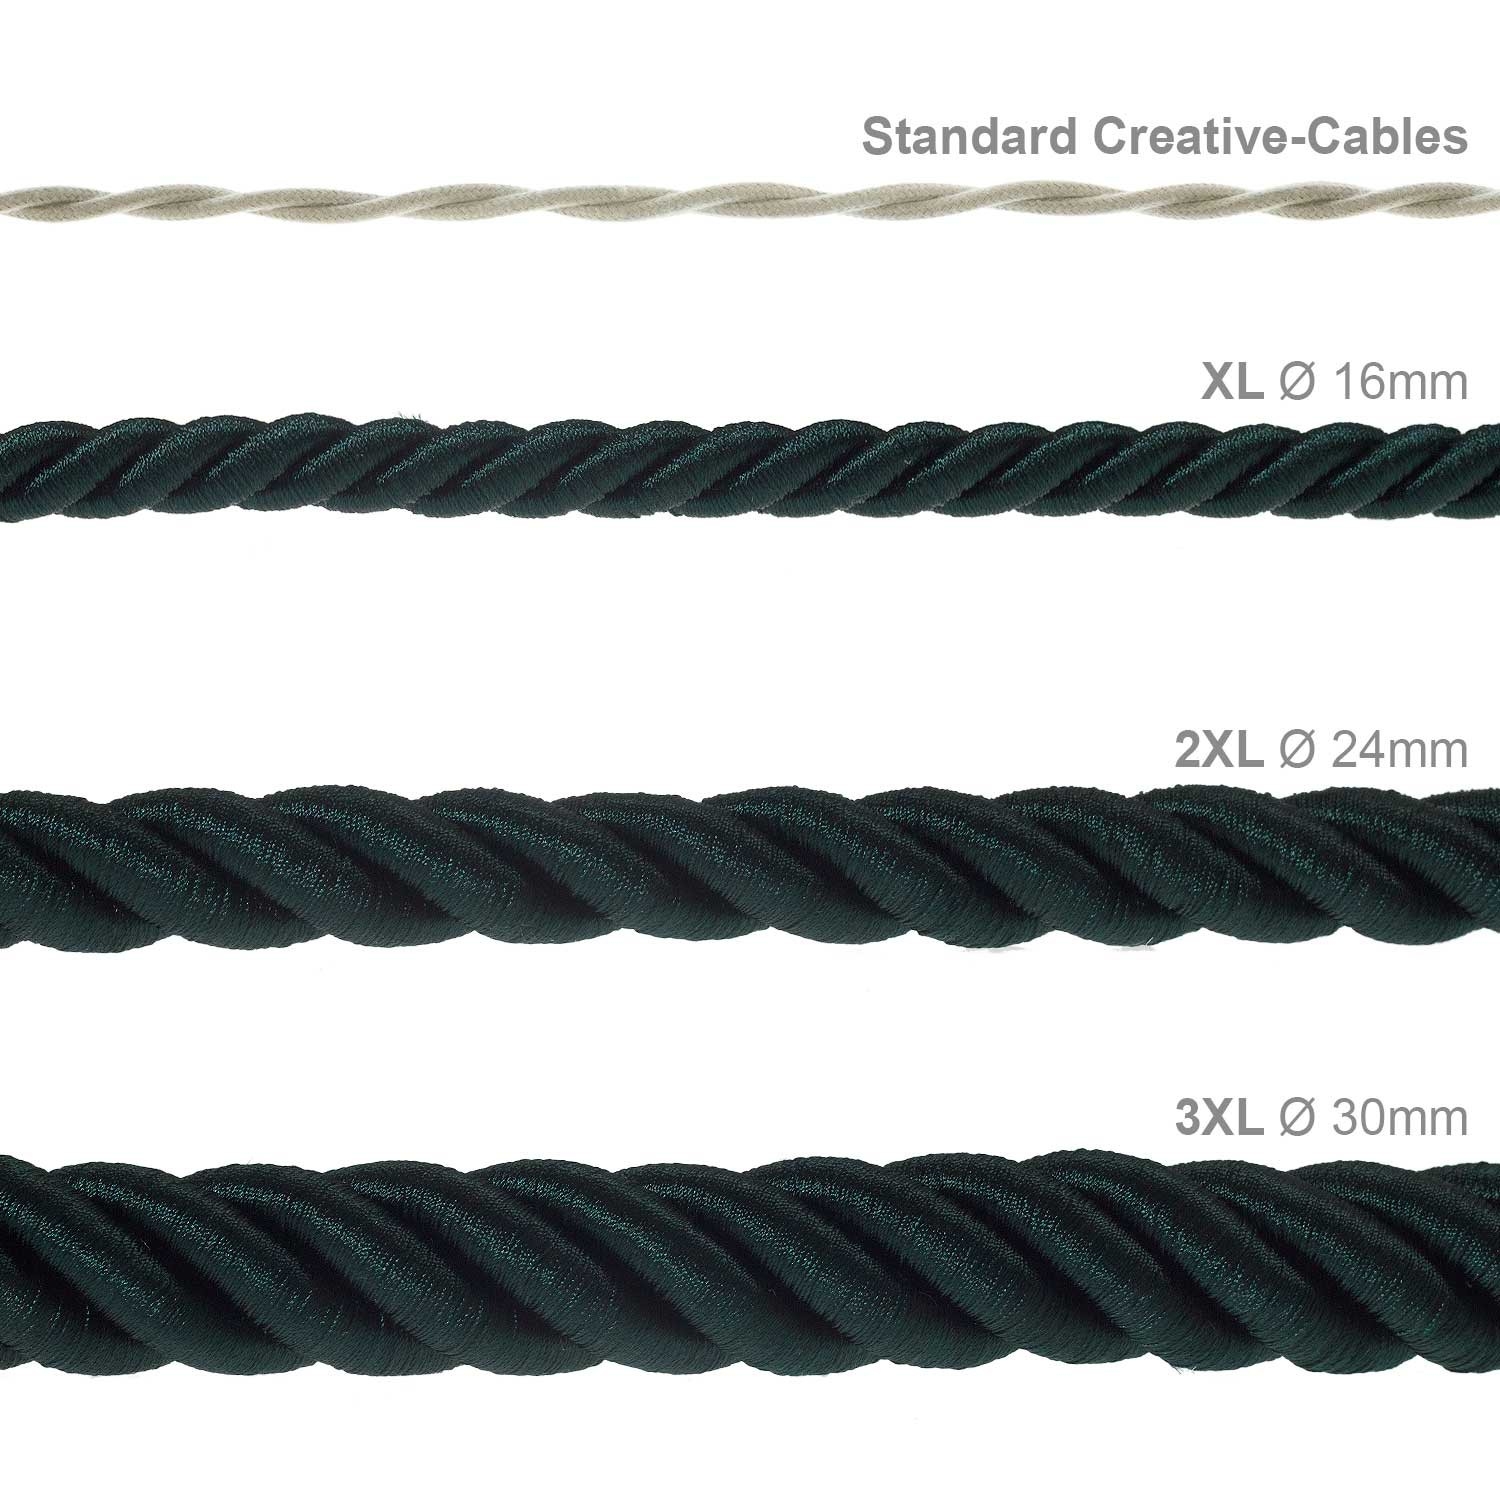 3XL Rope electrical wire 18/3 AWG wire inside. Shiny Dark Green Fabric. 30mm.